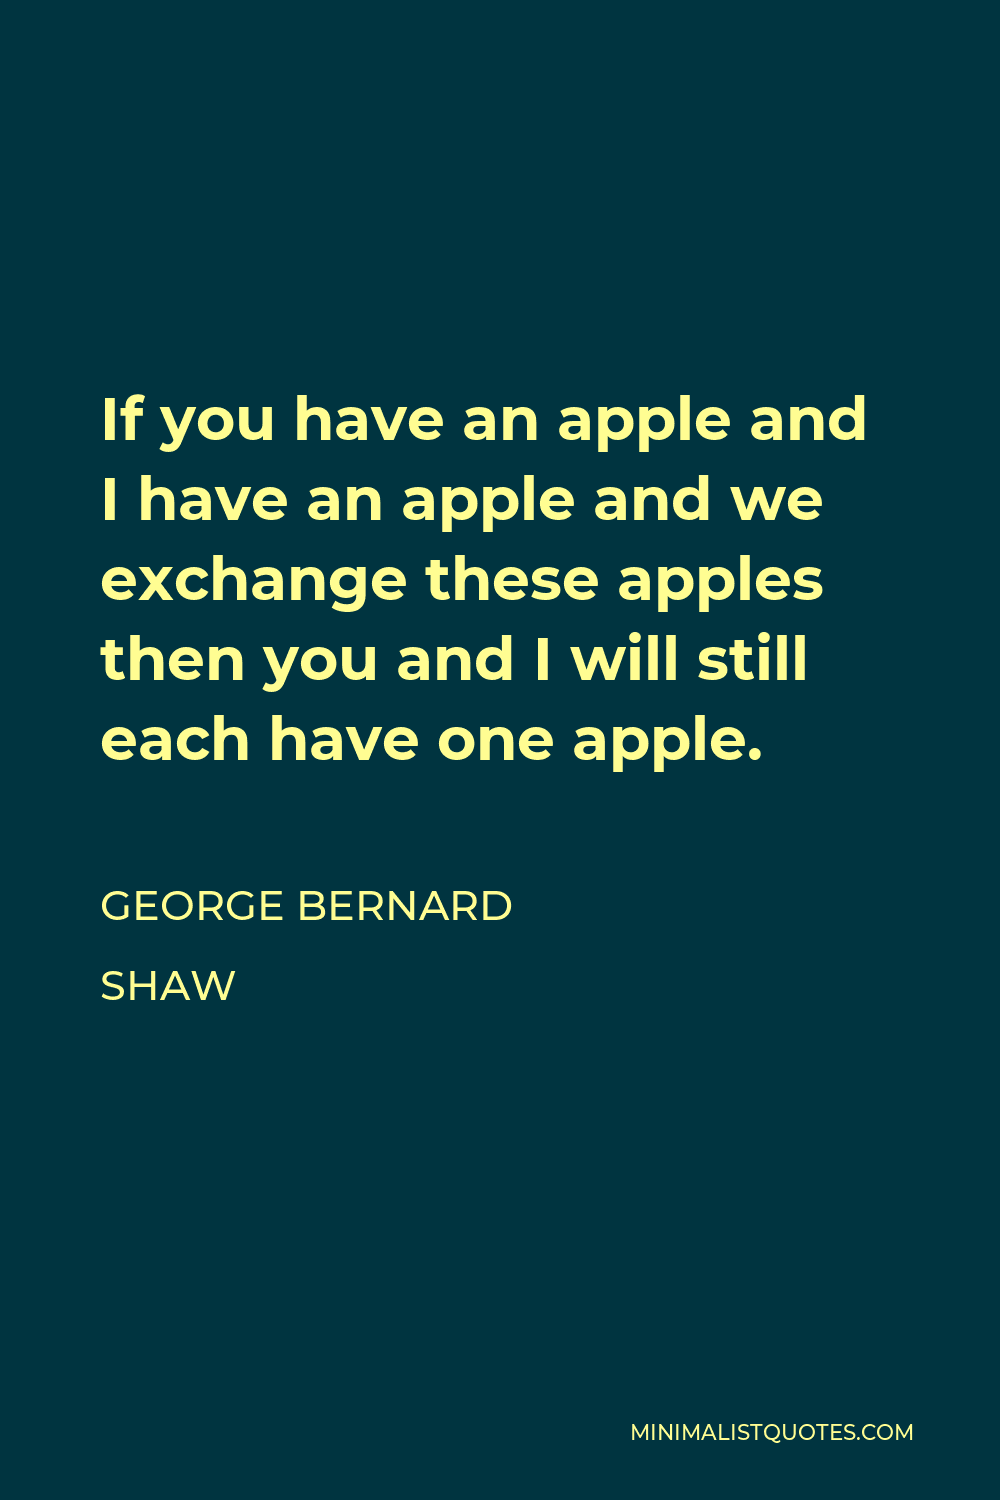 George Bernard Shaw Quote - If you have an apple and I have an apple and we exchange these apples then you and I will still each have one apple.